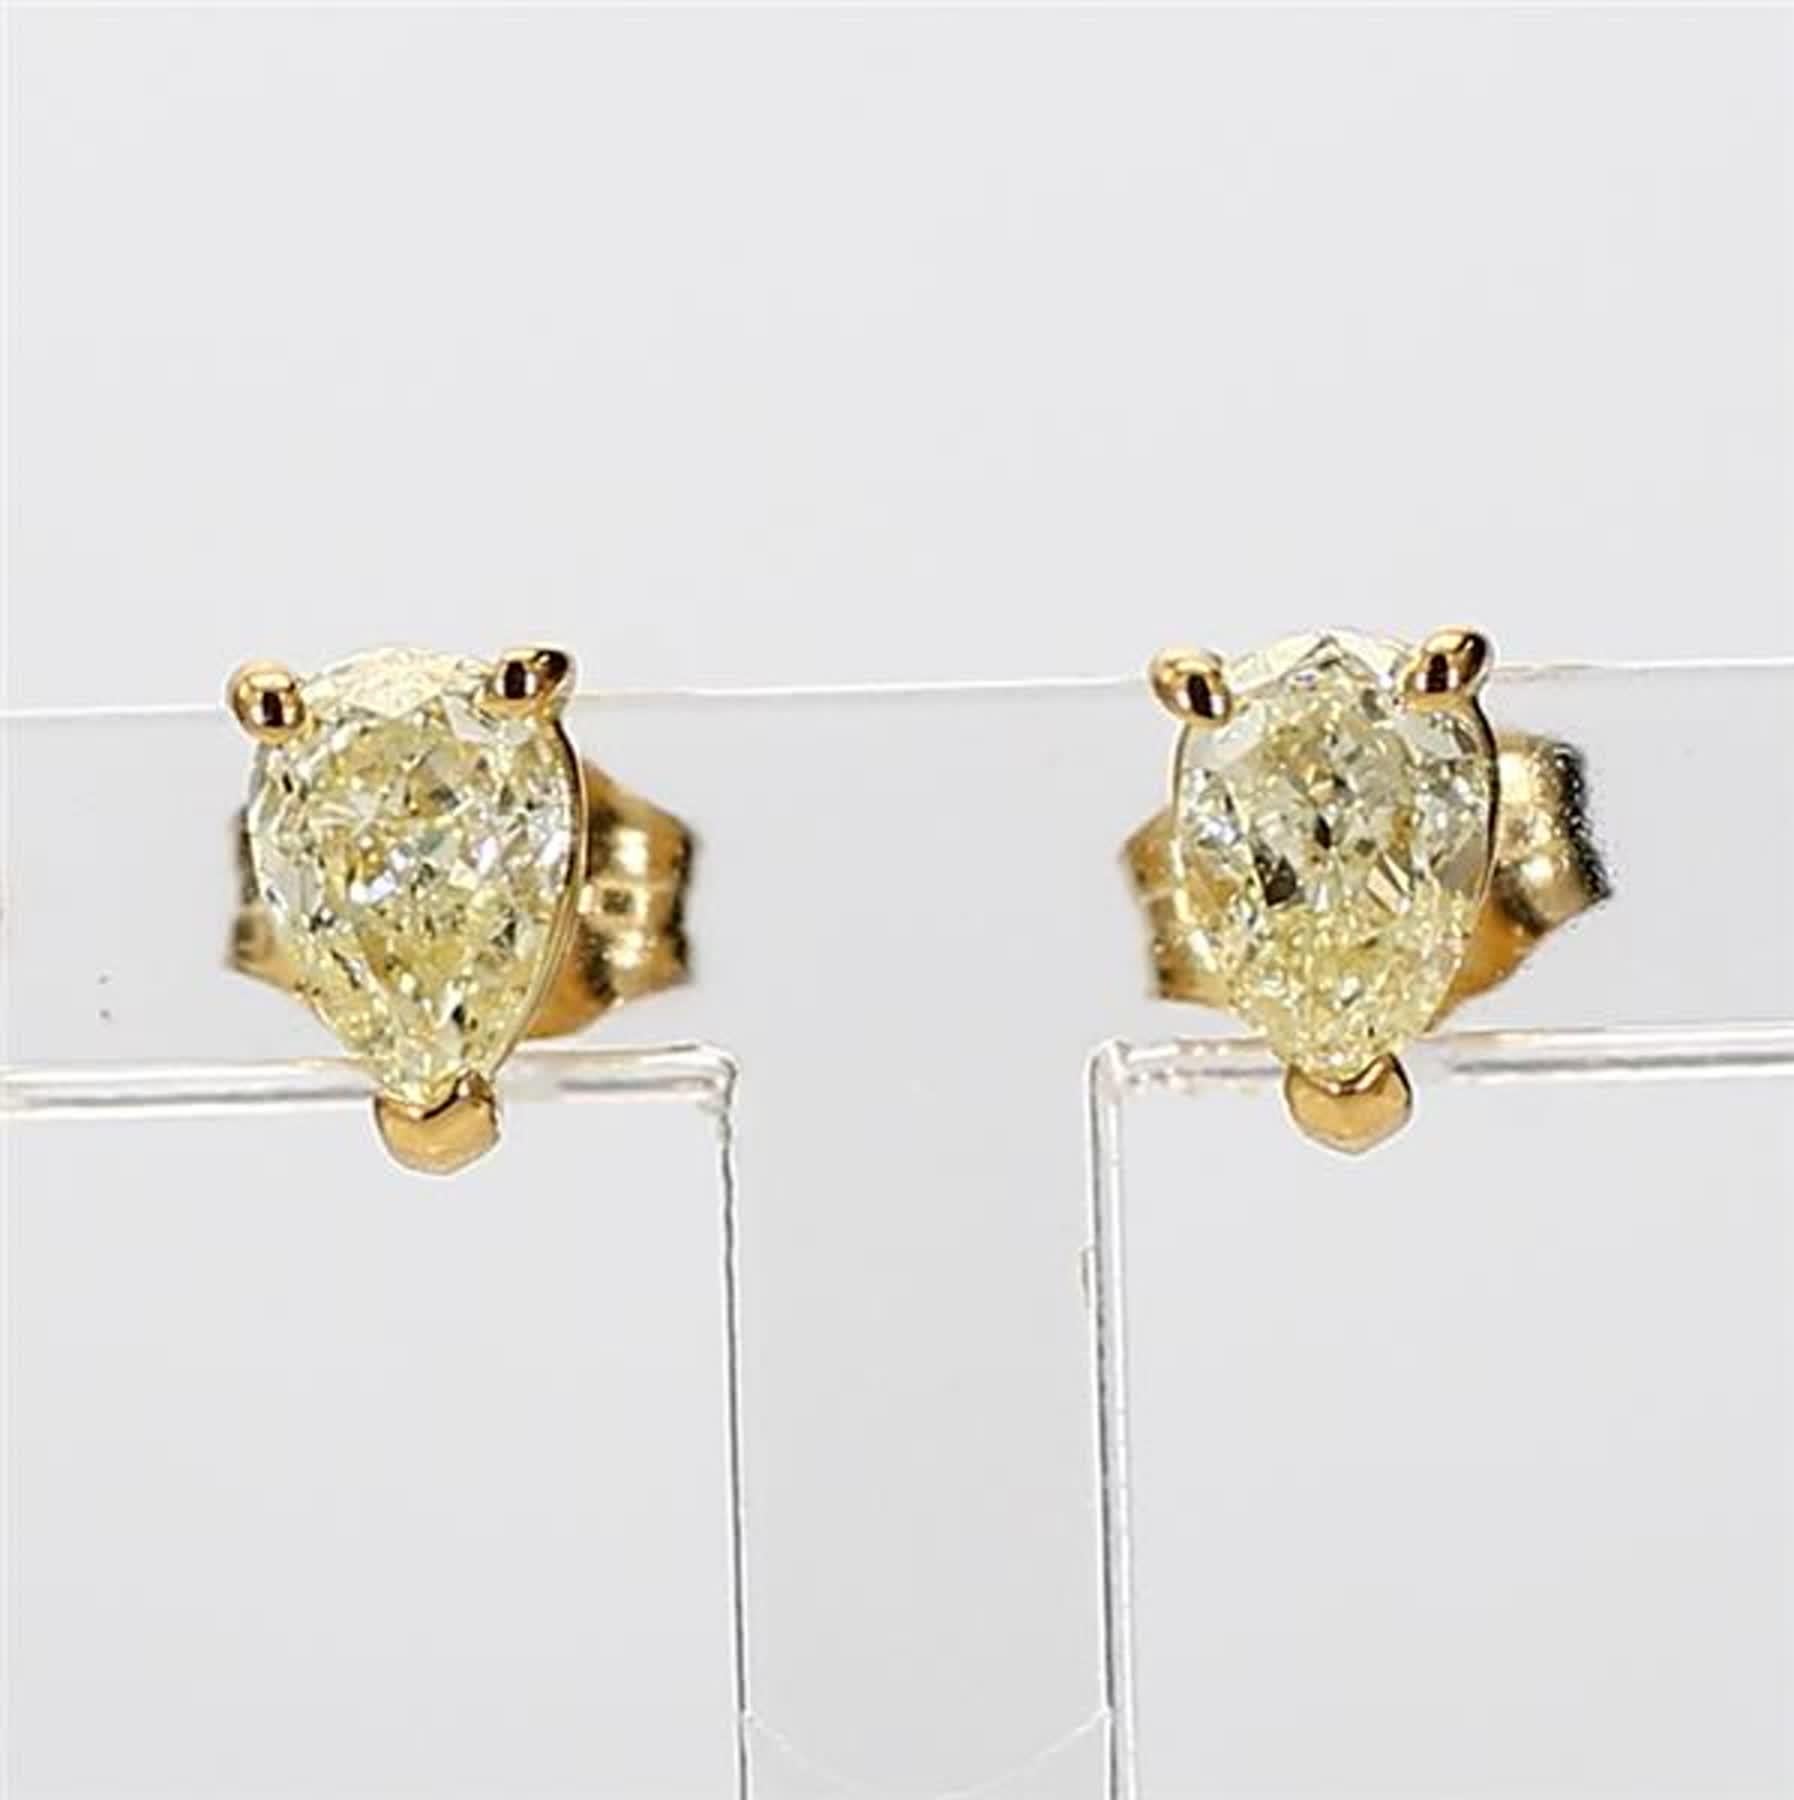 RareGemWorld's classic natural pear cut yellow diamond earrings. Mounted in a beautiful 18K Yellow Gold setting with natural pear cut yellow diamonds. These earrings are guaranteed to impress and enhance your personal collection!

Total Weight: